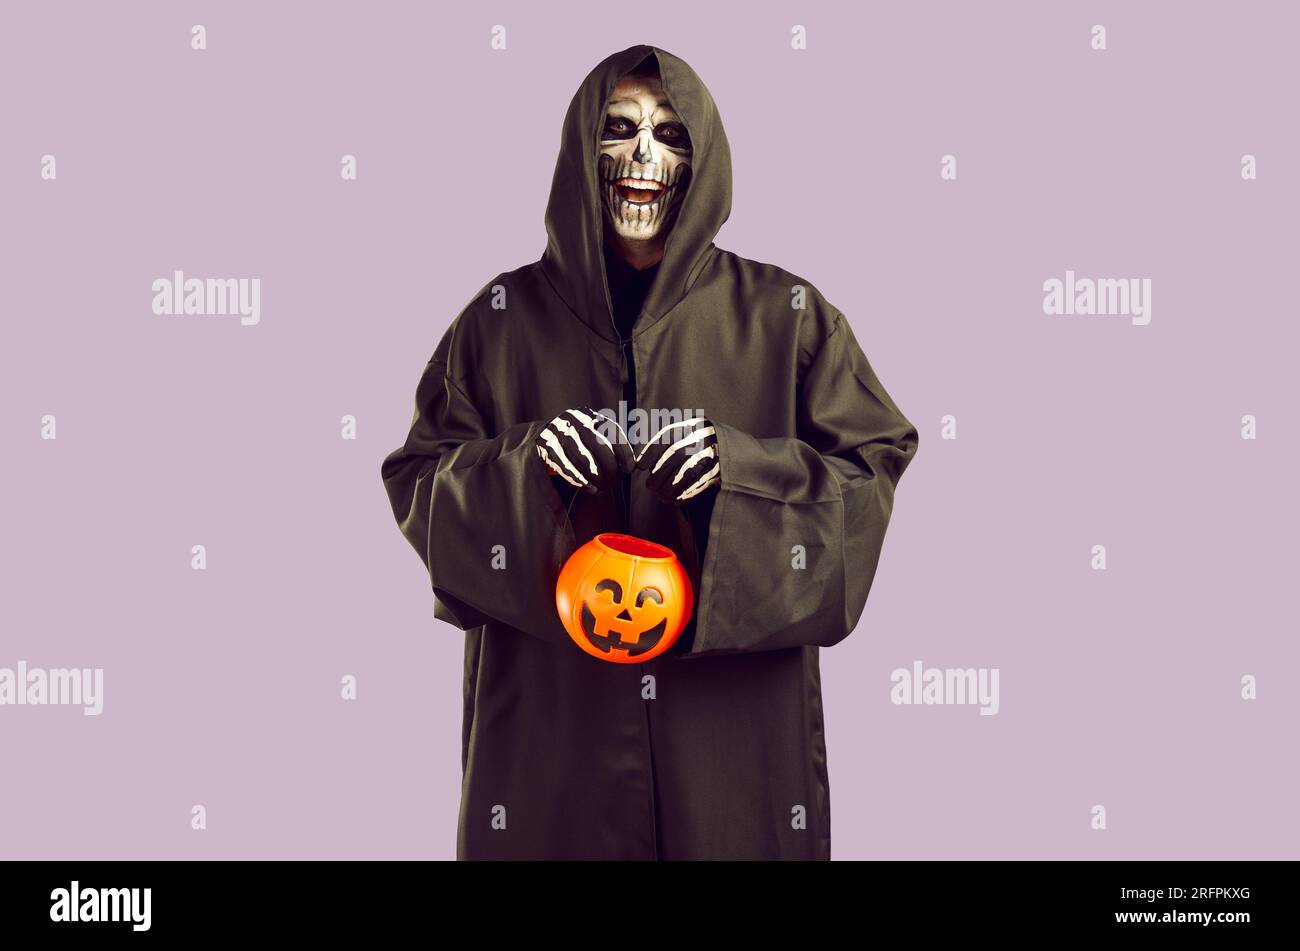 Scary man with skull makeup in hooded black cloak Stock Photo